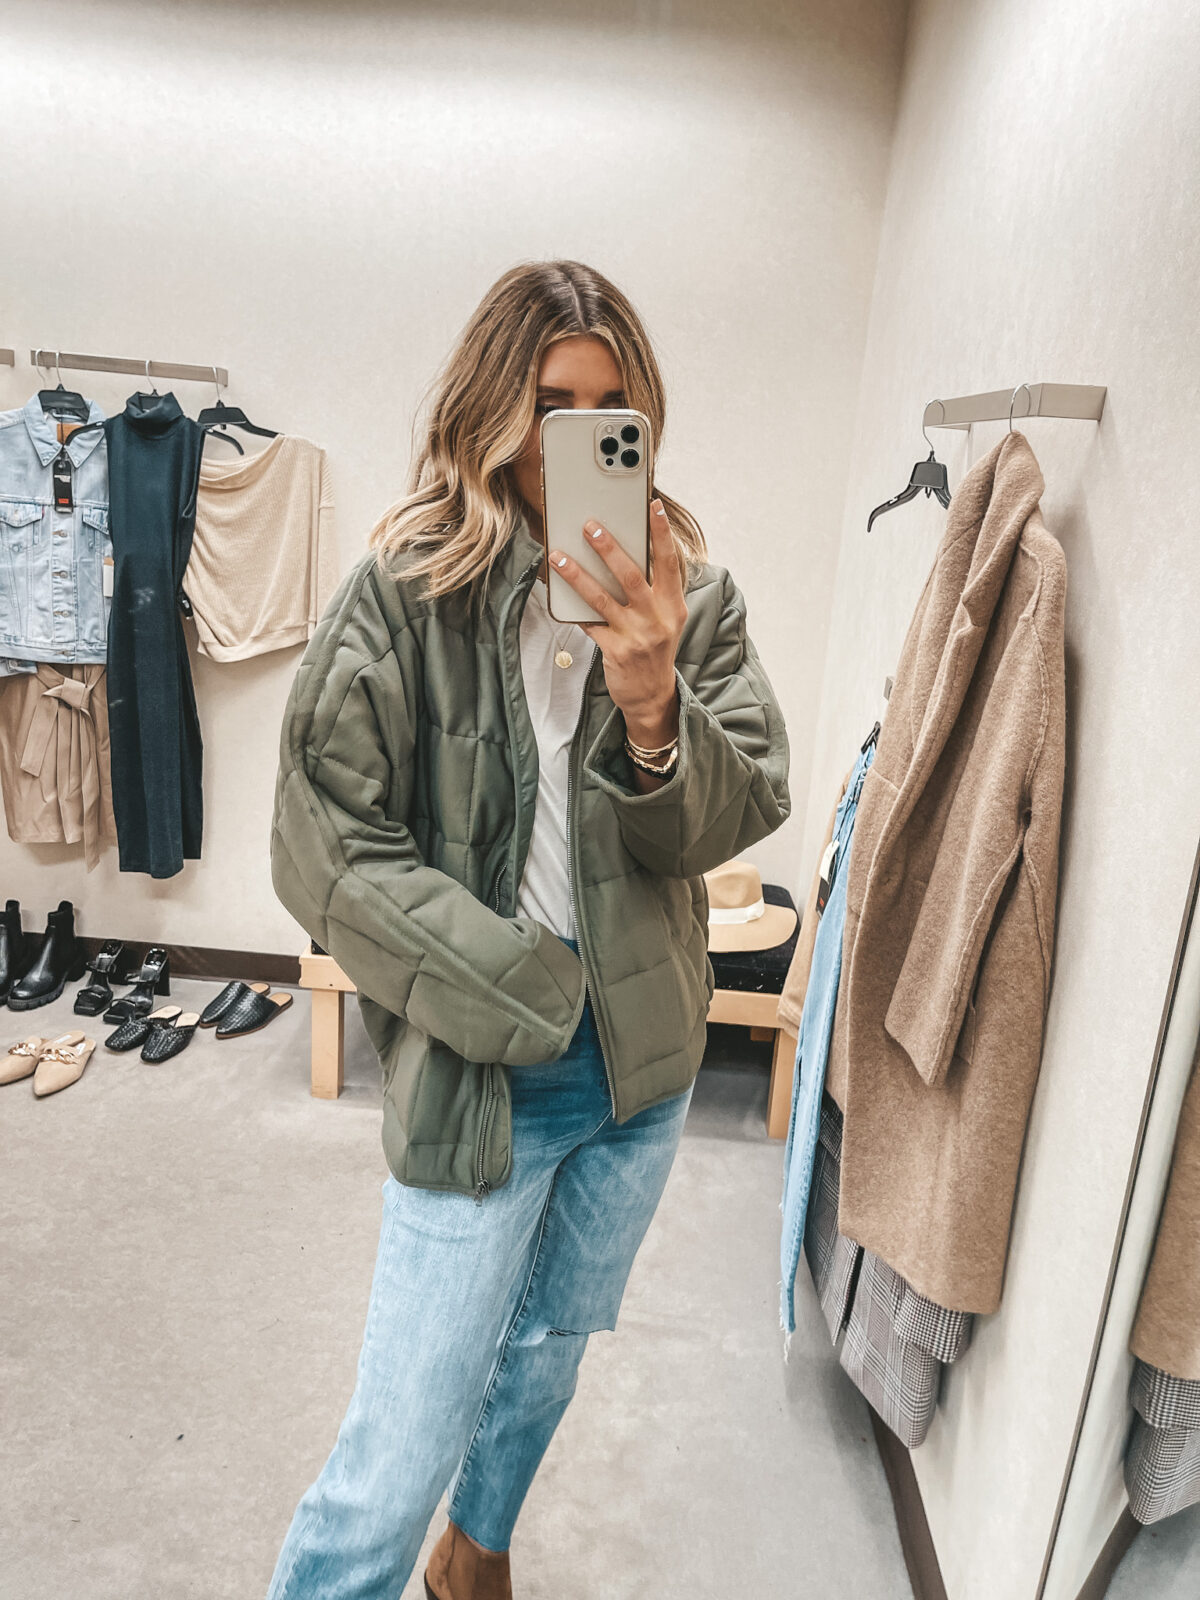 Nordstrom Anniversary Sale 2021: In-Store Try-On - the Flexman Flat